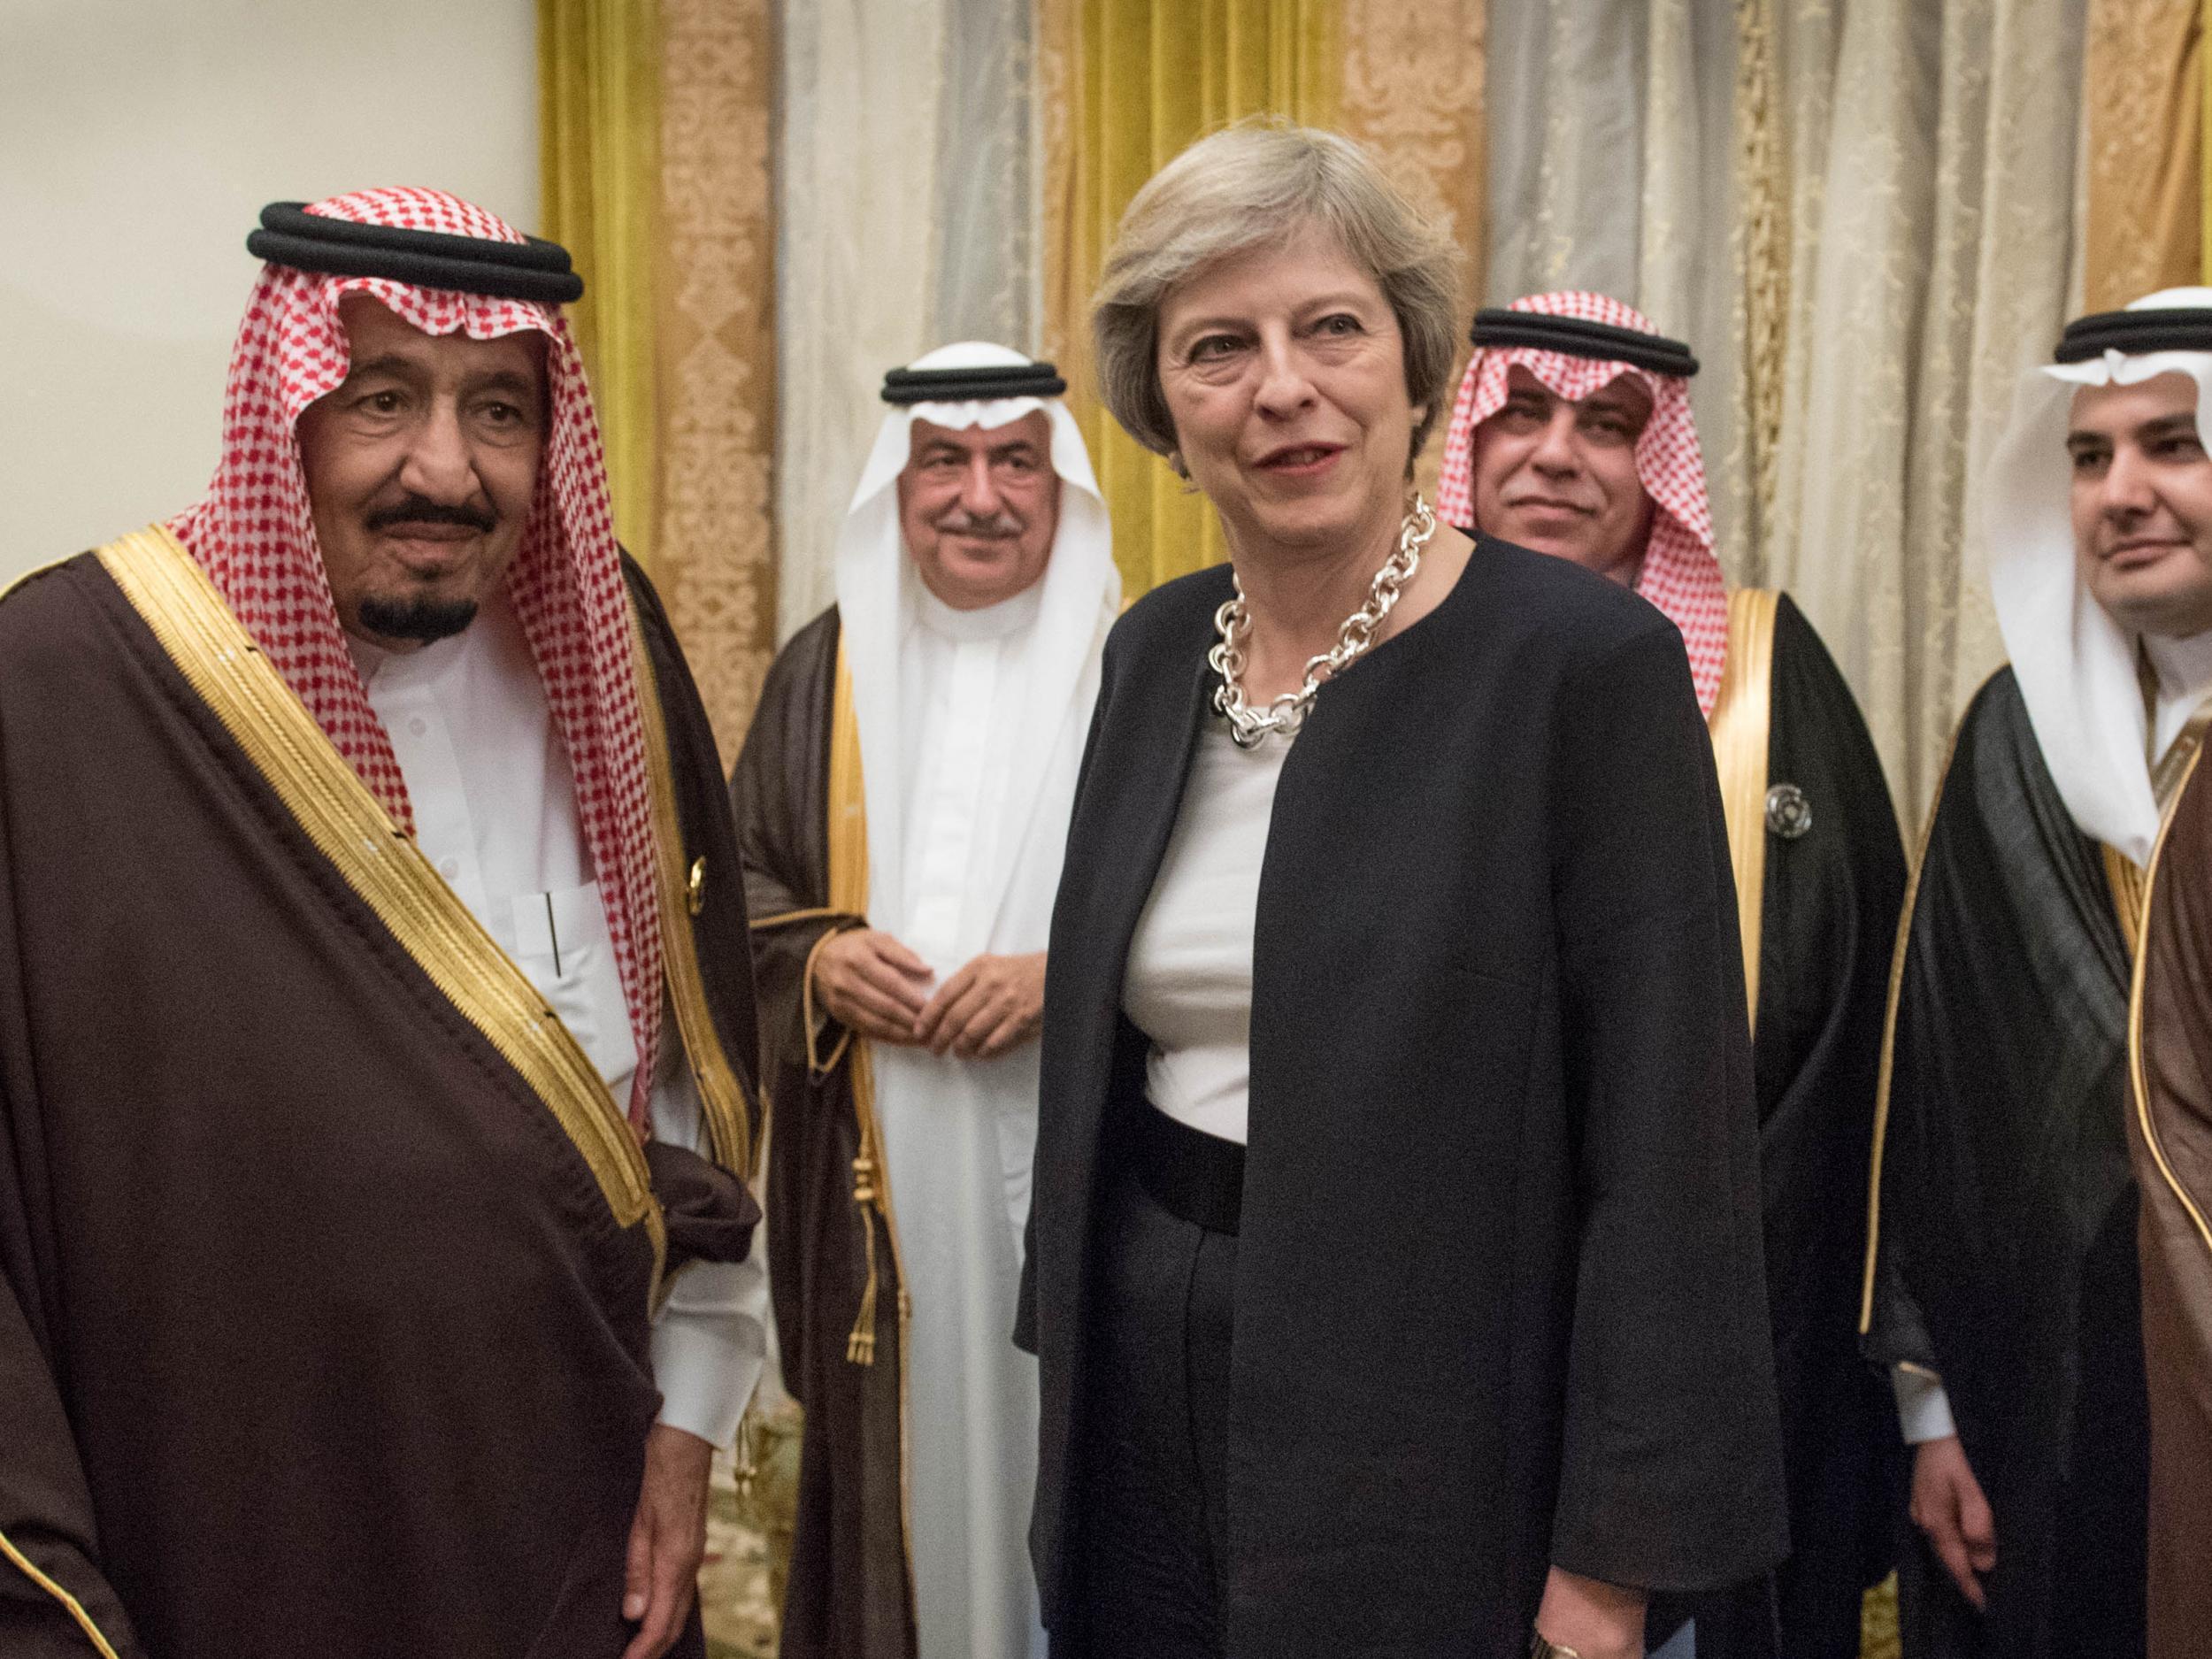 Theresa May with King Salman (left) during a visit to Saudi Arabia in April